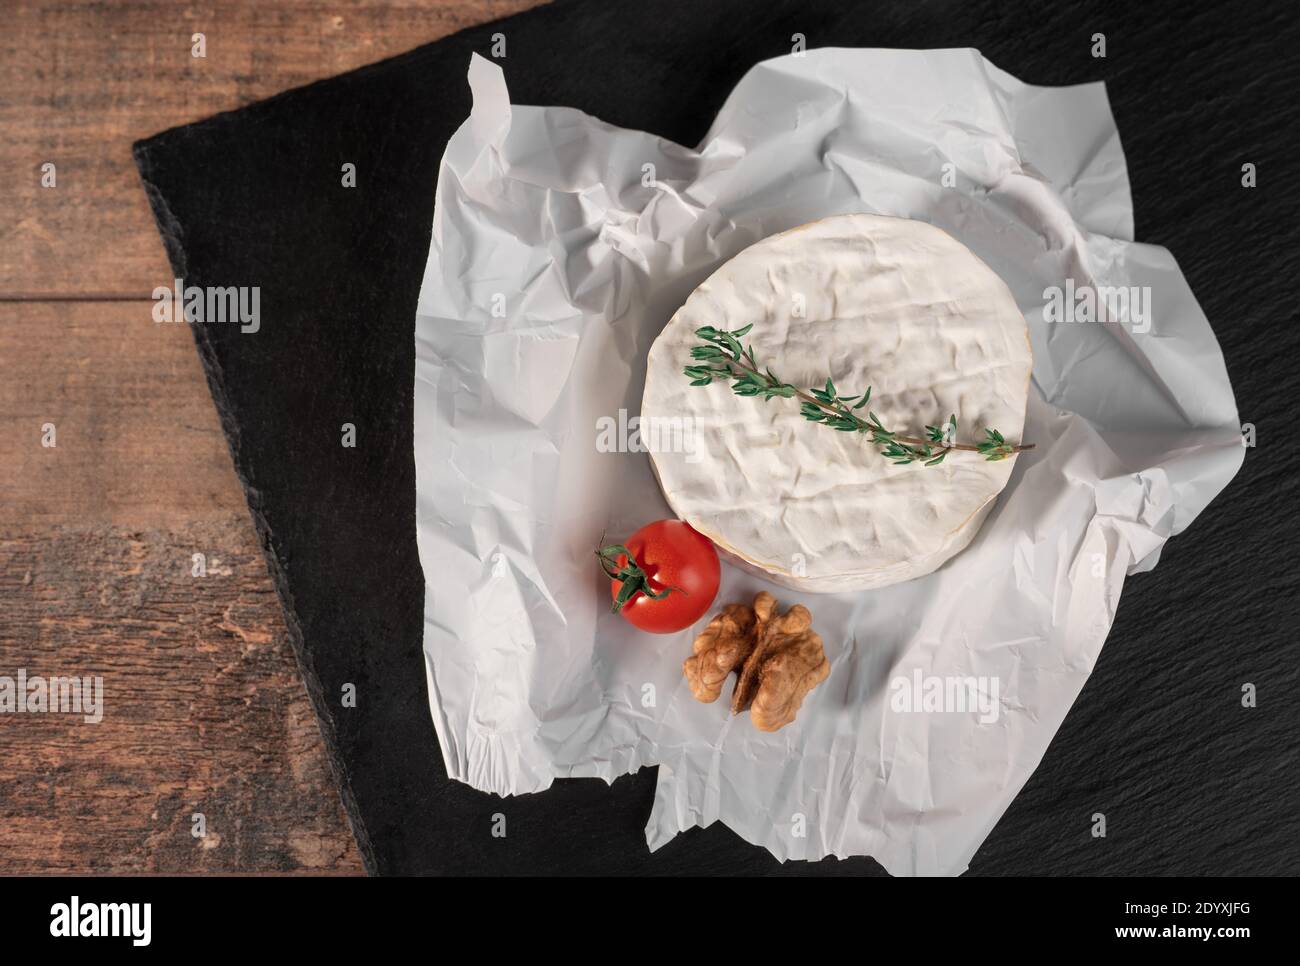 Delicious brie cheese on black background. Brie type of cheese. Camembert. Fresh Brie cheese and a slice on stone board. Italian, French cheese. Stock Photo